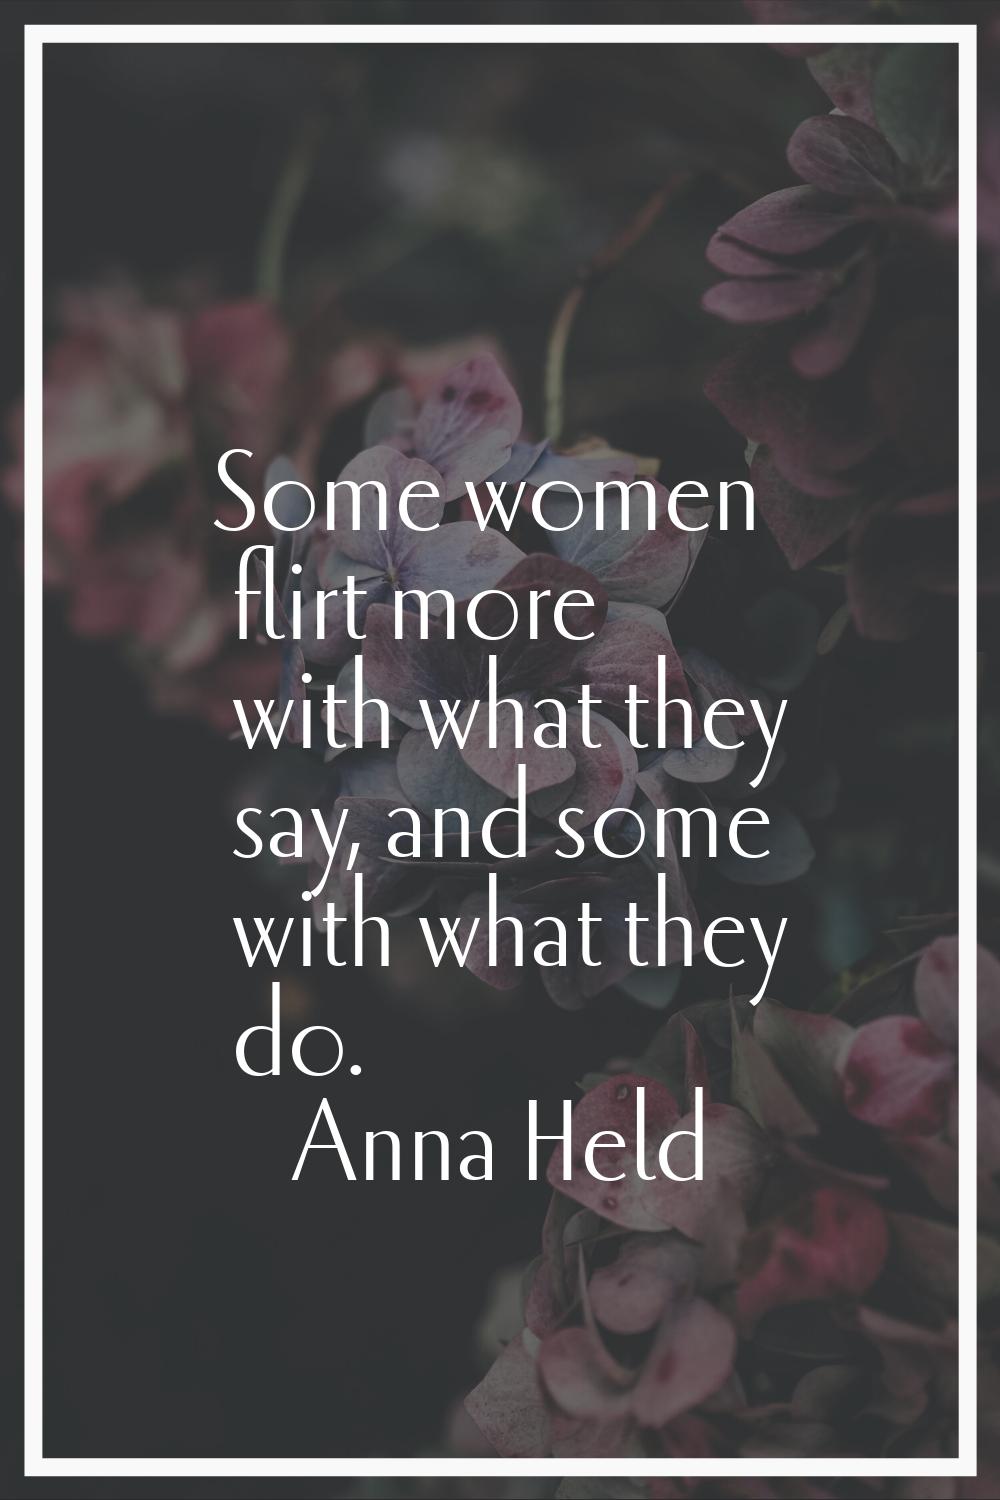 Some women flirt more with what they say, and some with what they do.